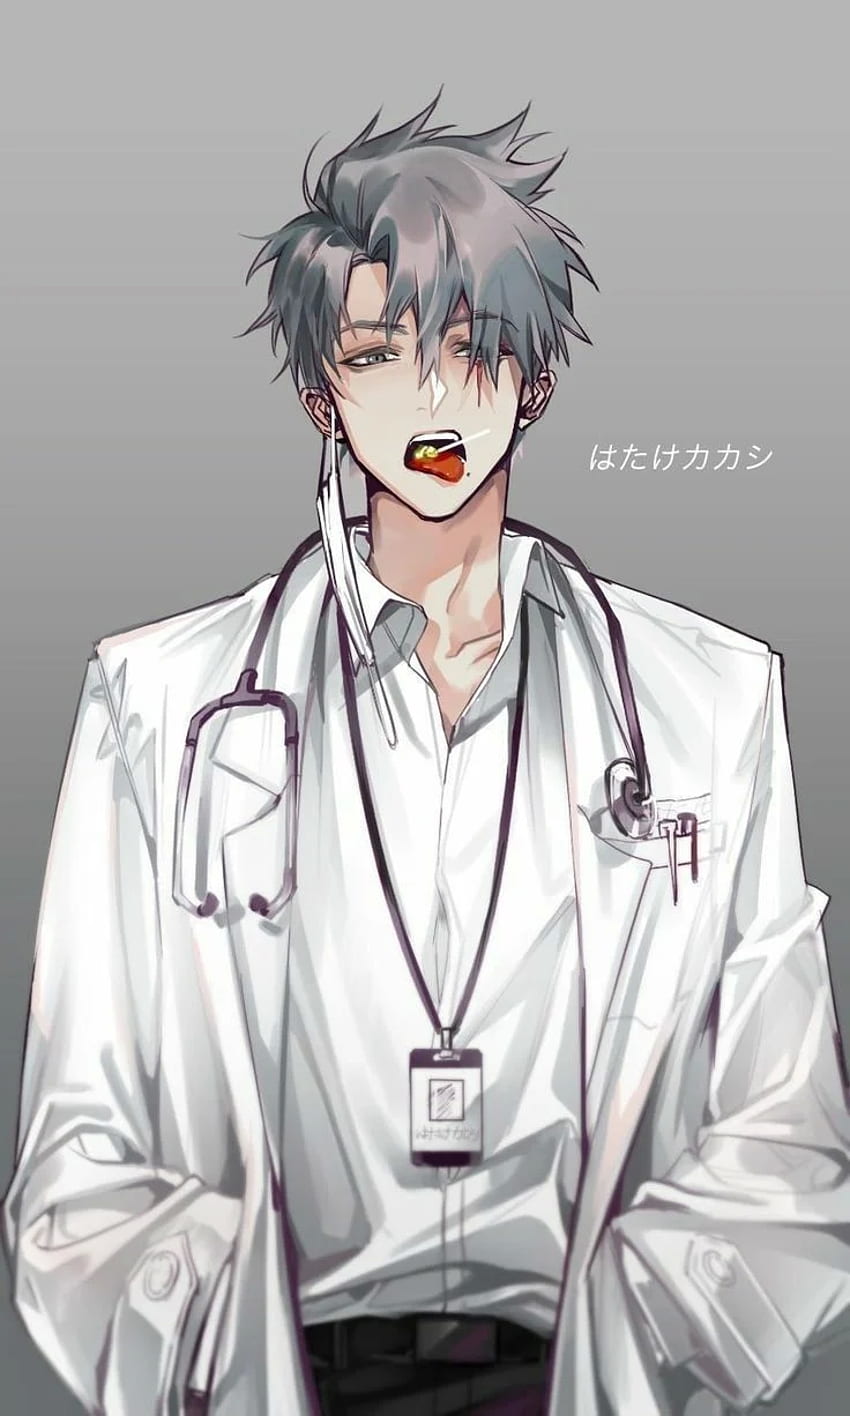 Top 22 Best Doctors From Anime World  Anime India